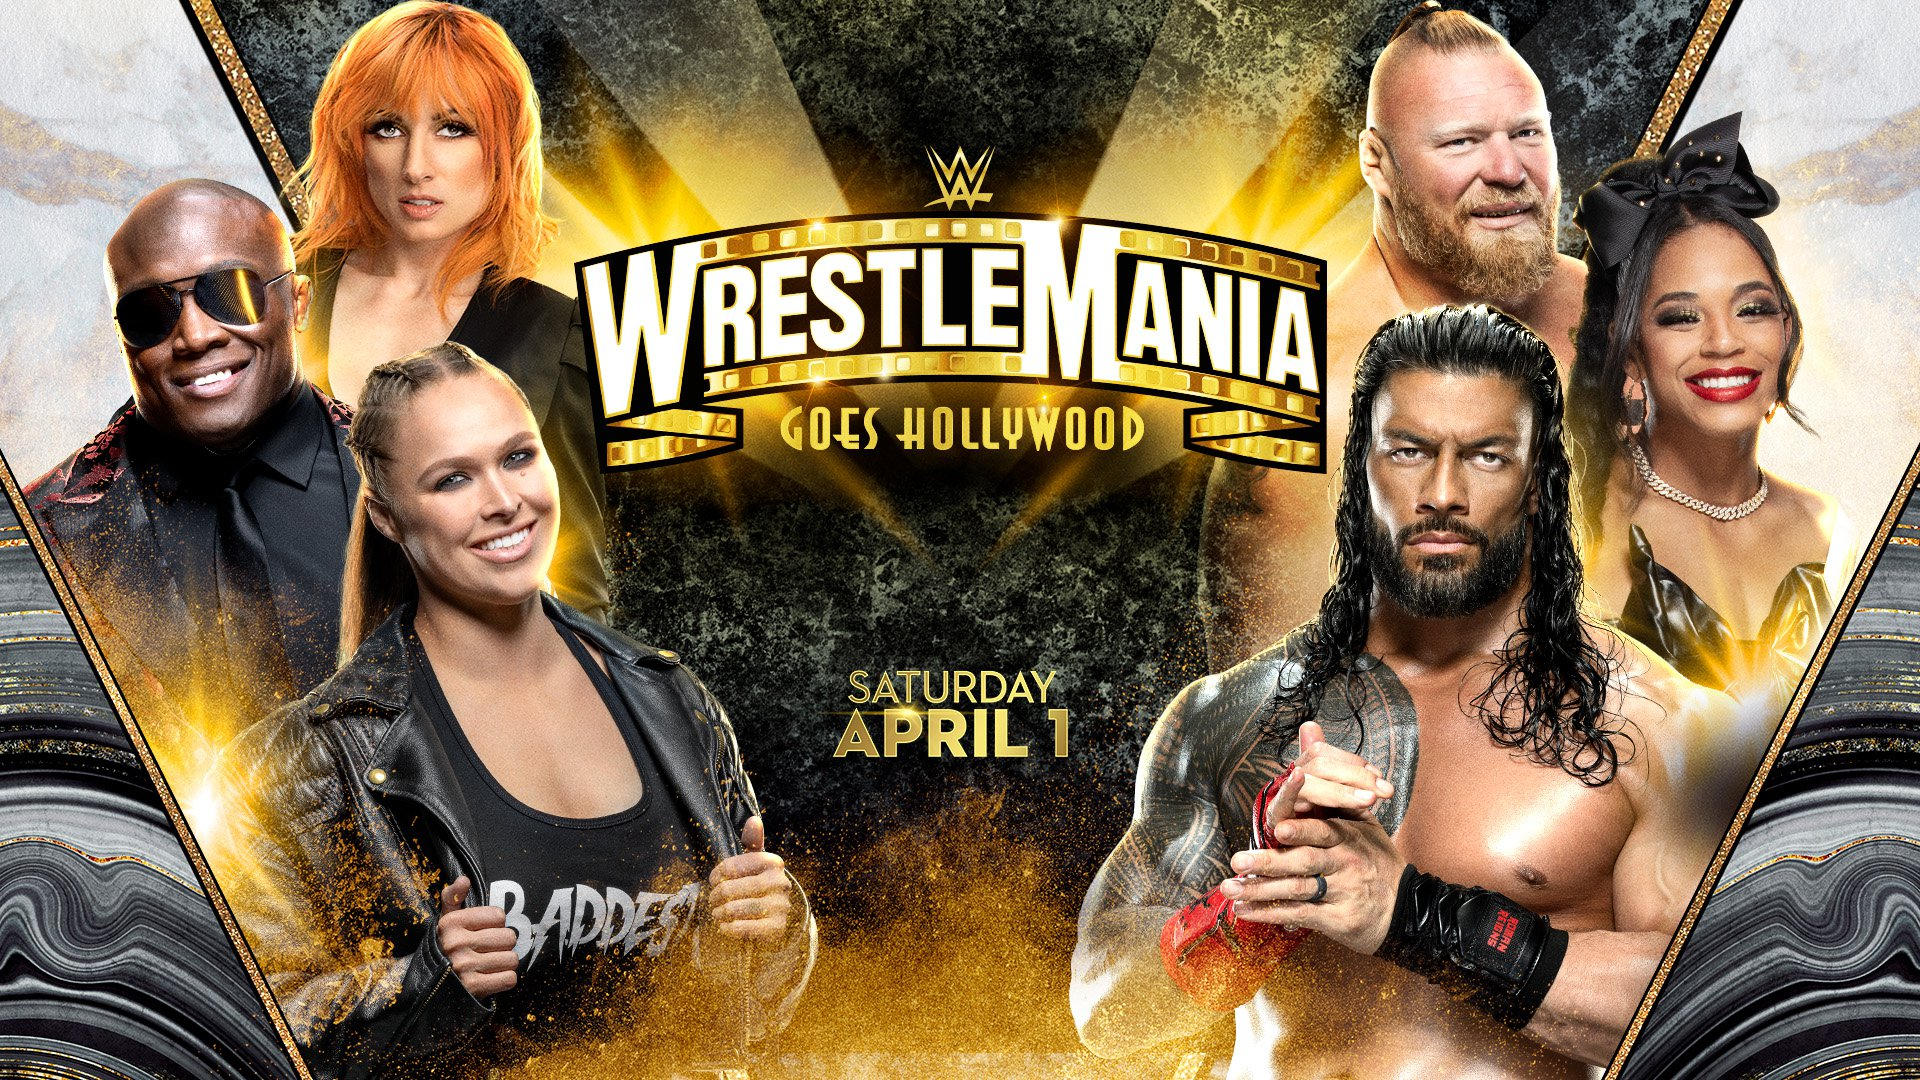 WWE WrestleMania 39: WWE advertises Roman Reigns, Brock Lesnar and other top WWE superstars